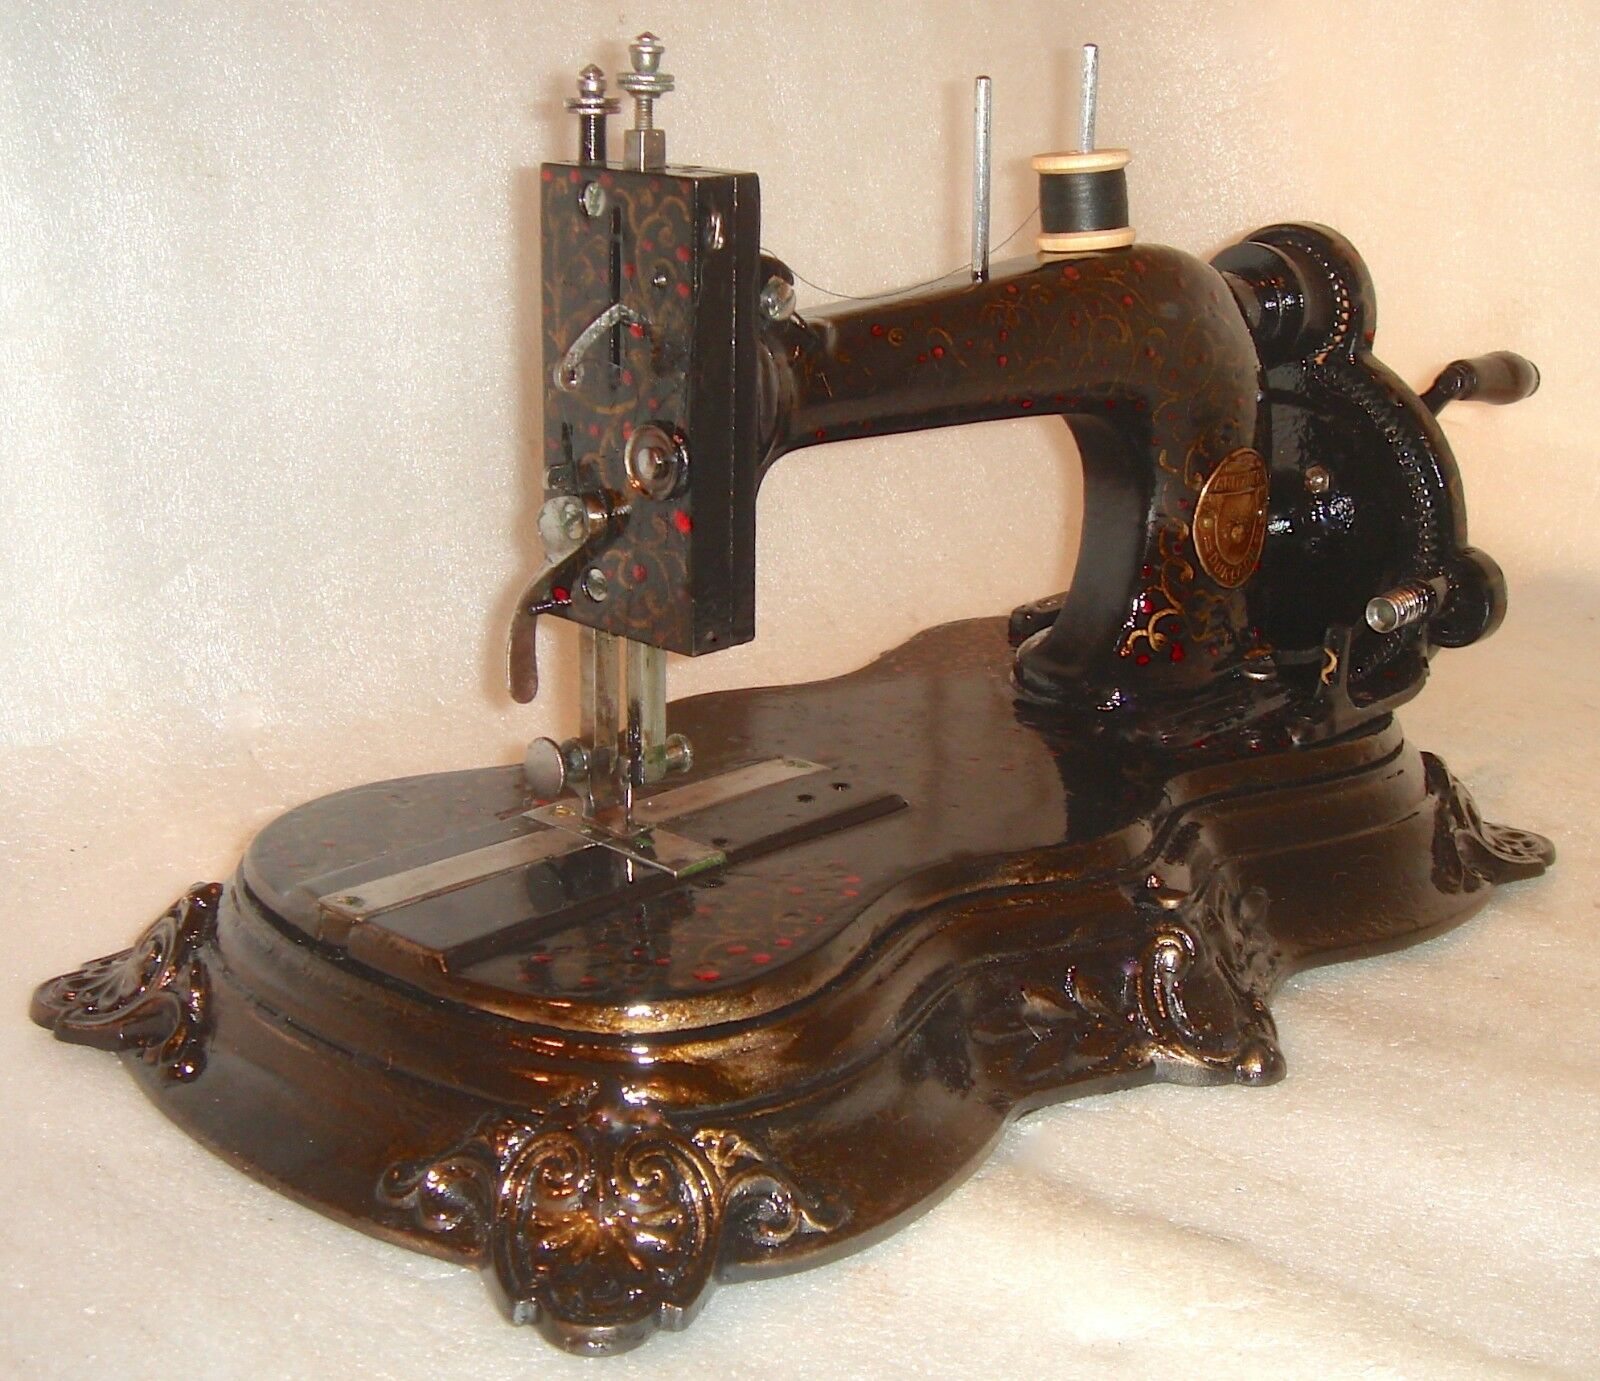 gritzner durlach sewing machine serial numbers